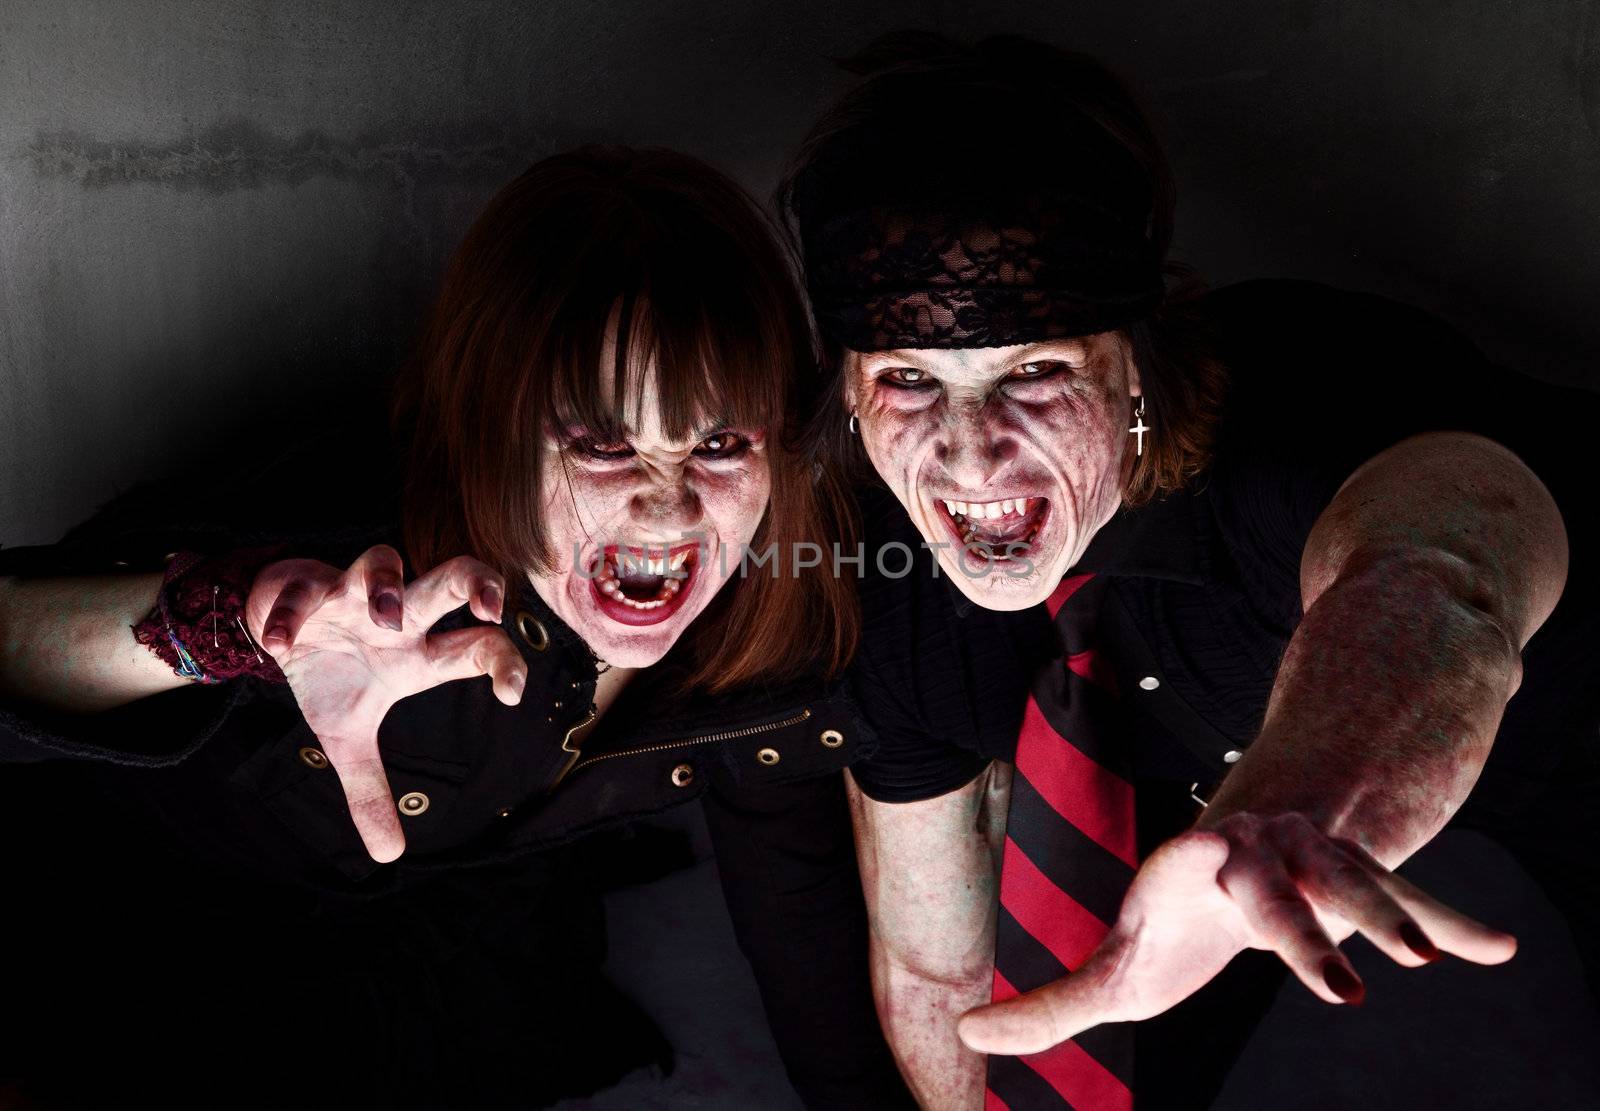 Male and female bloody zombies reaching out